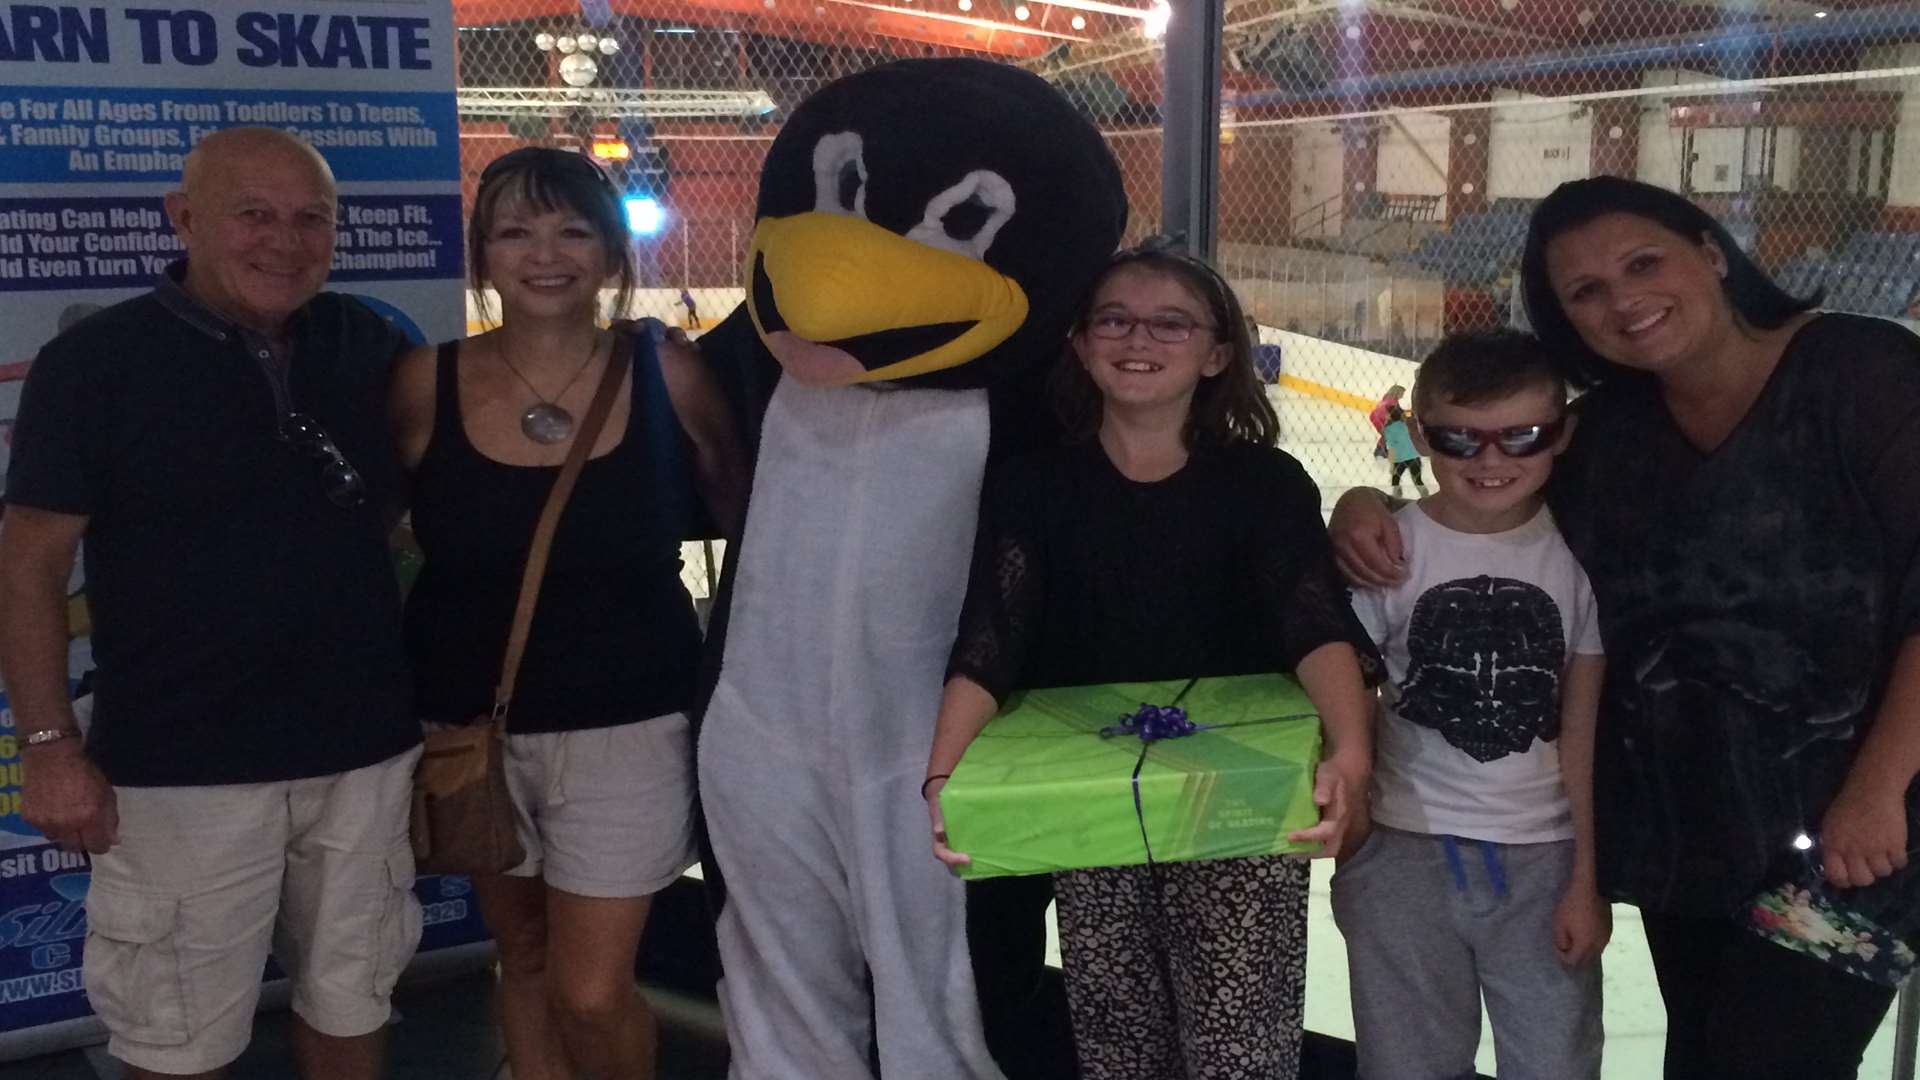 Lucy Studd and family meet Percy the penguin, mascot of Silver Blades ice rink.